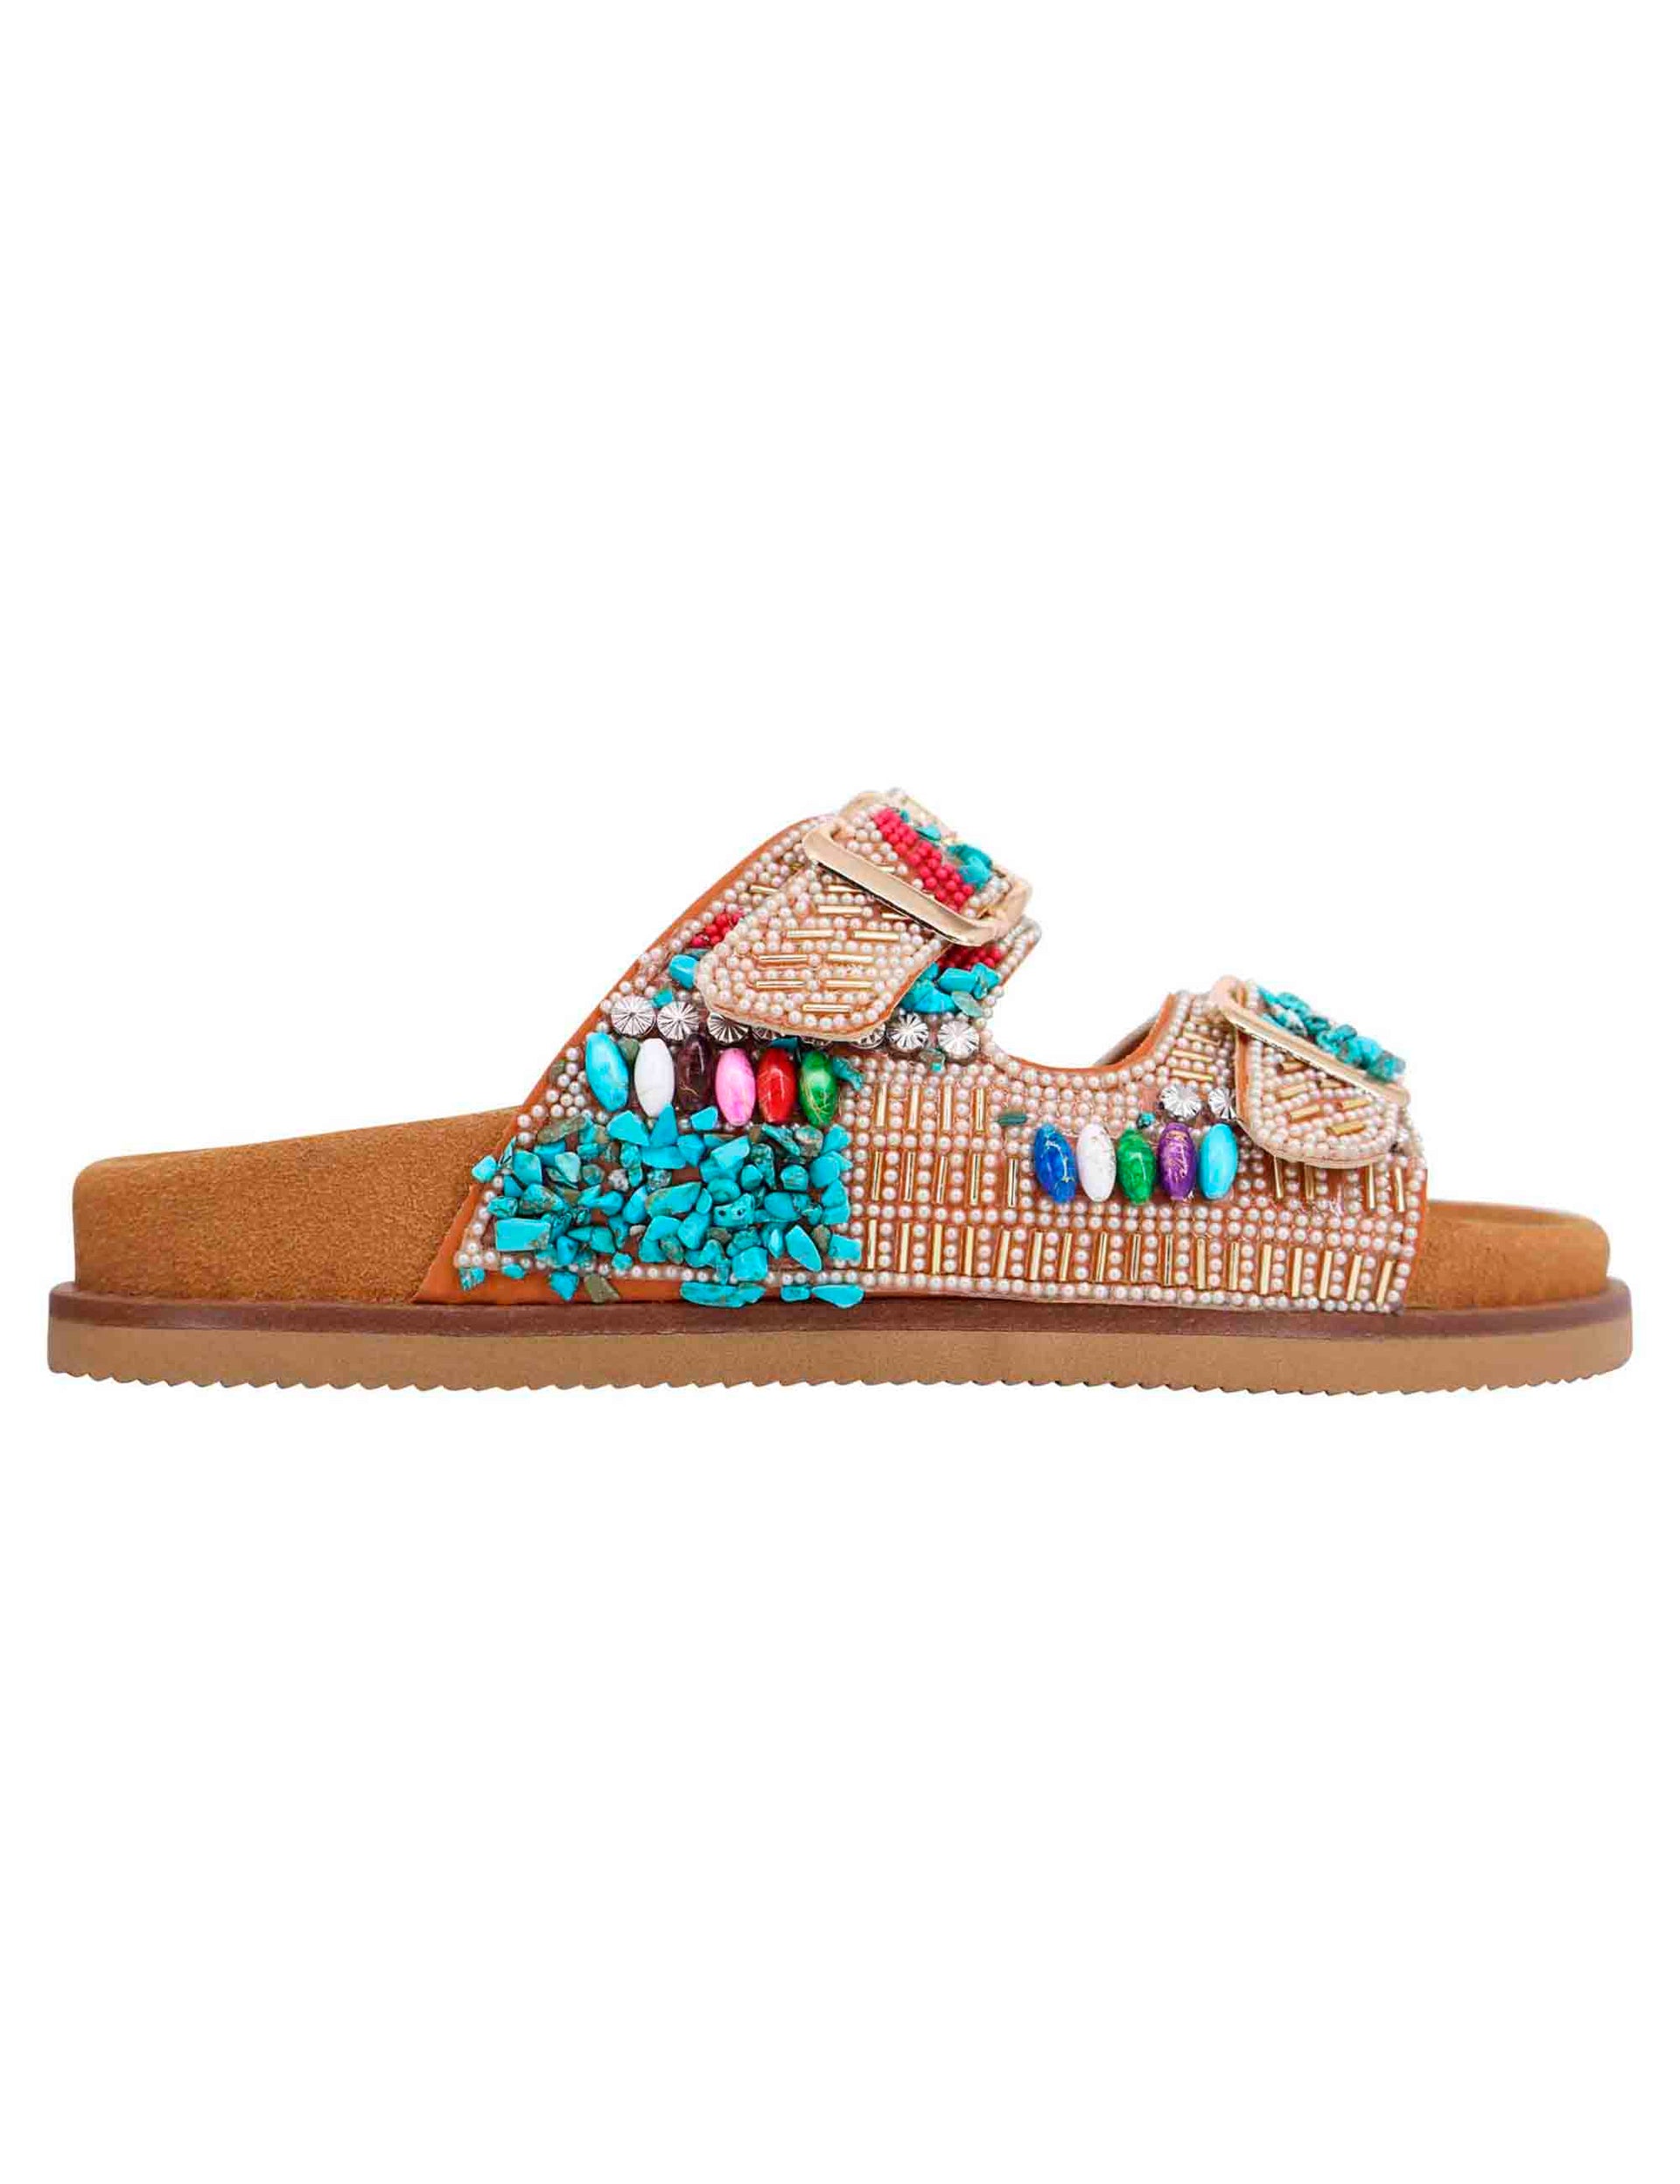 Women's sandals with fussbett in beige fabric with multicolored rhinestones